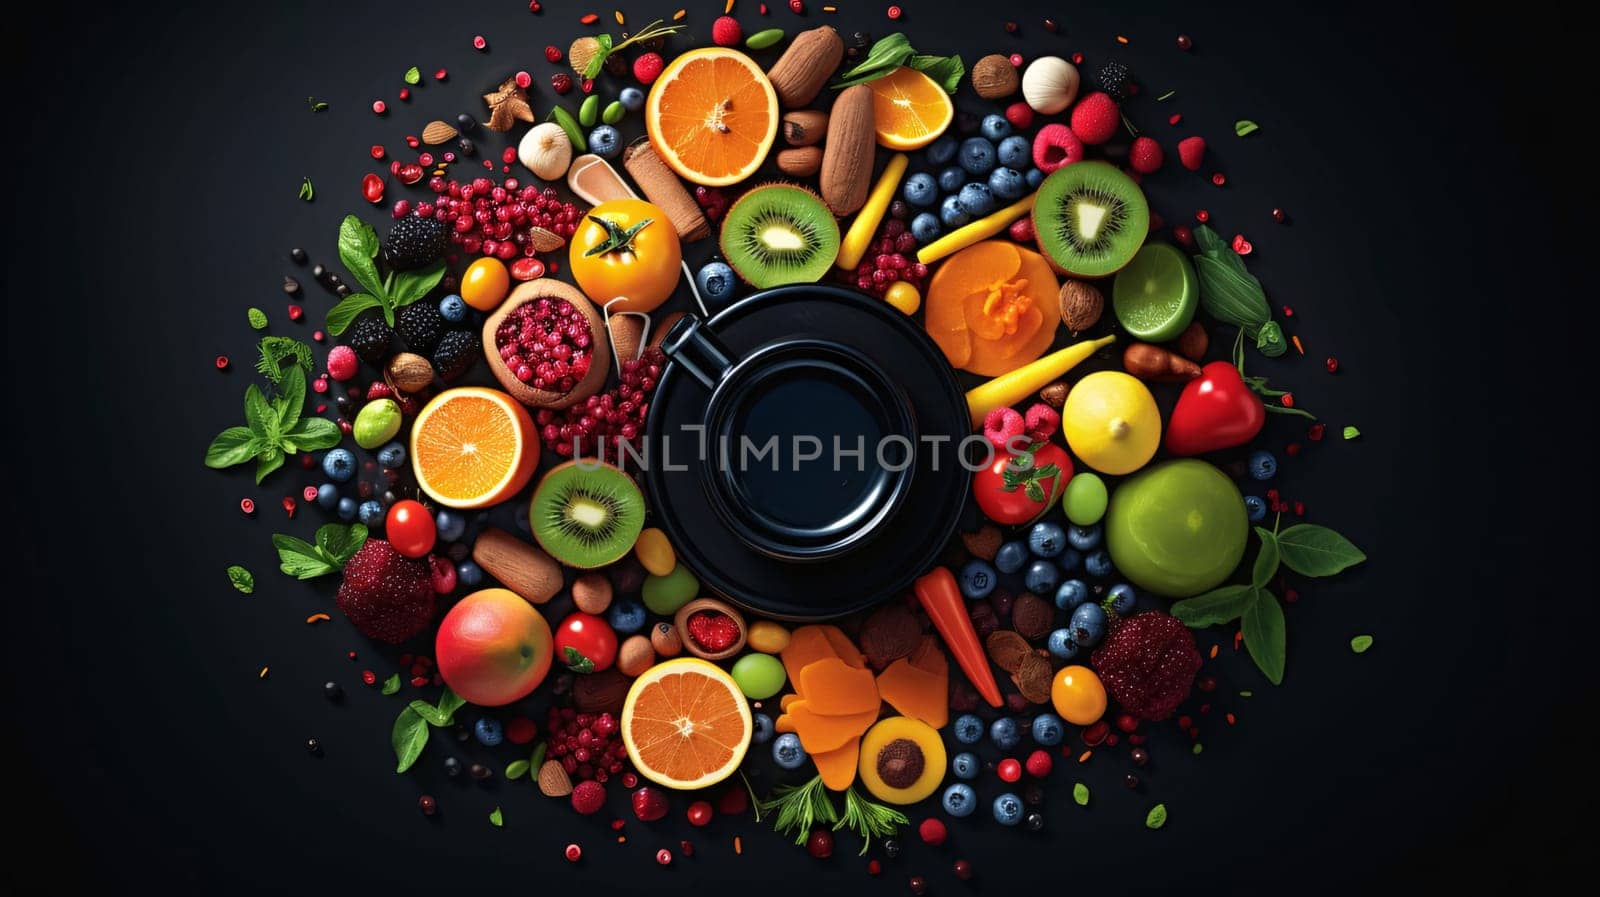 Fruits and vegetables around a teapot on a black background by ThemesS